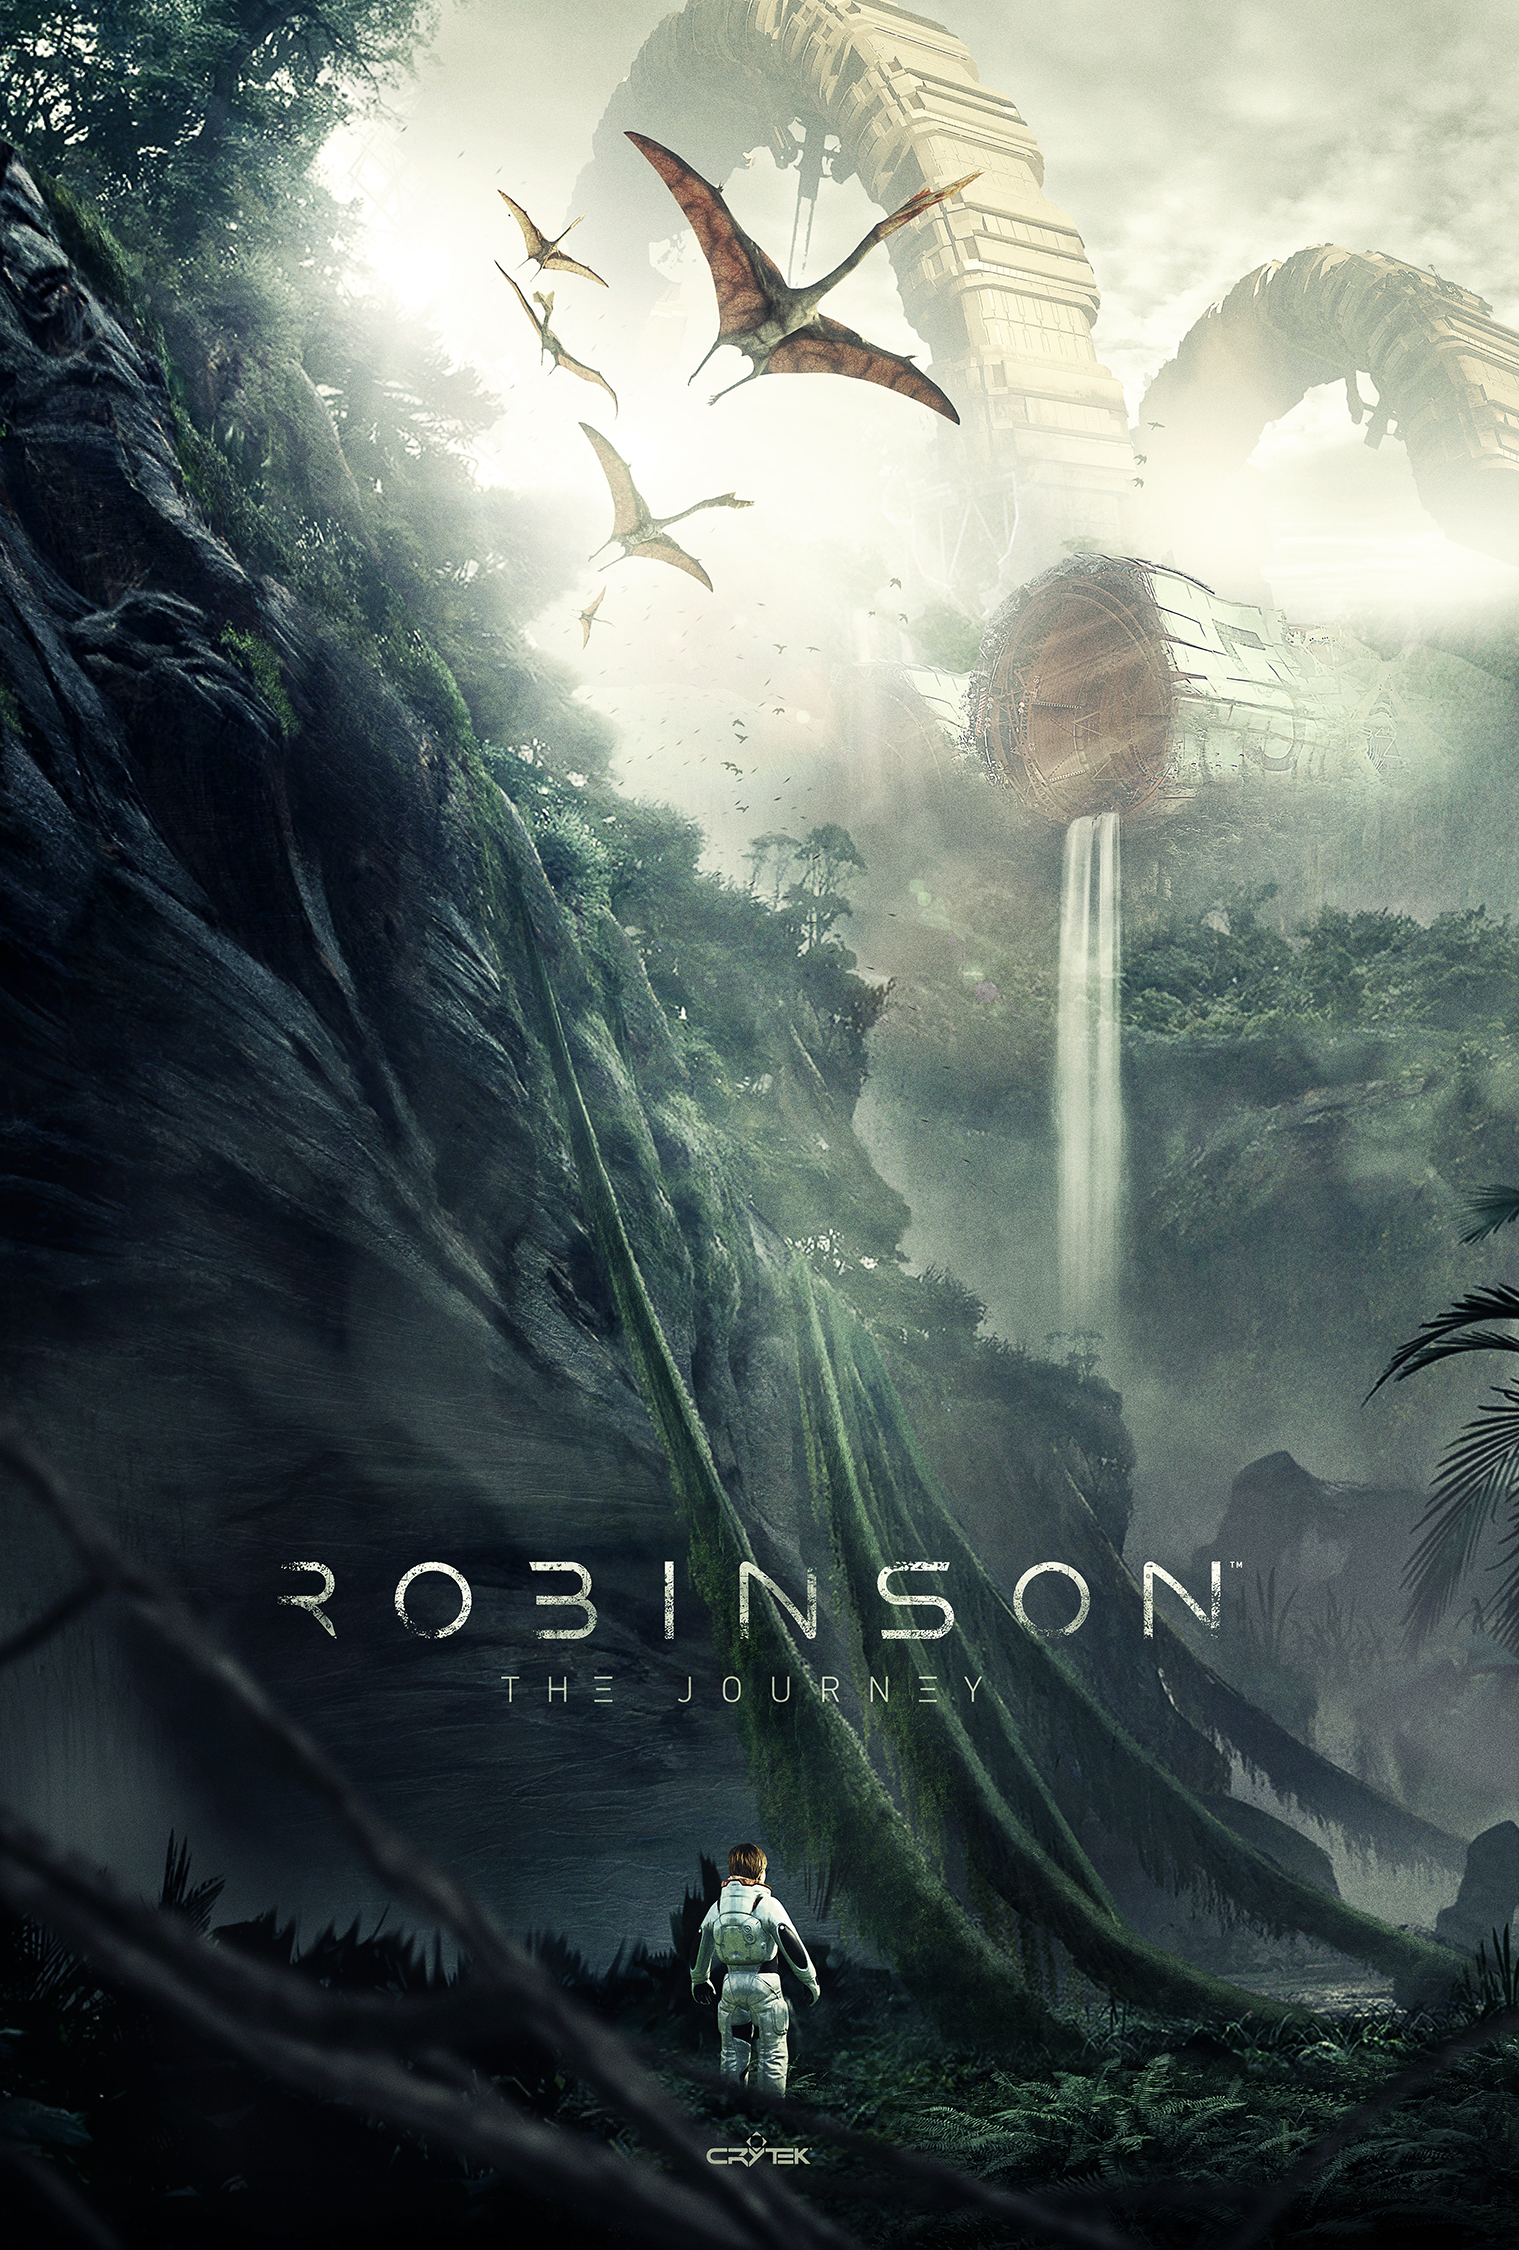 Robinson: The Journey Backgrounds, Compatible - PC, Mobile, Gadgets| 1519x2250 px